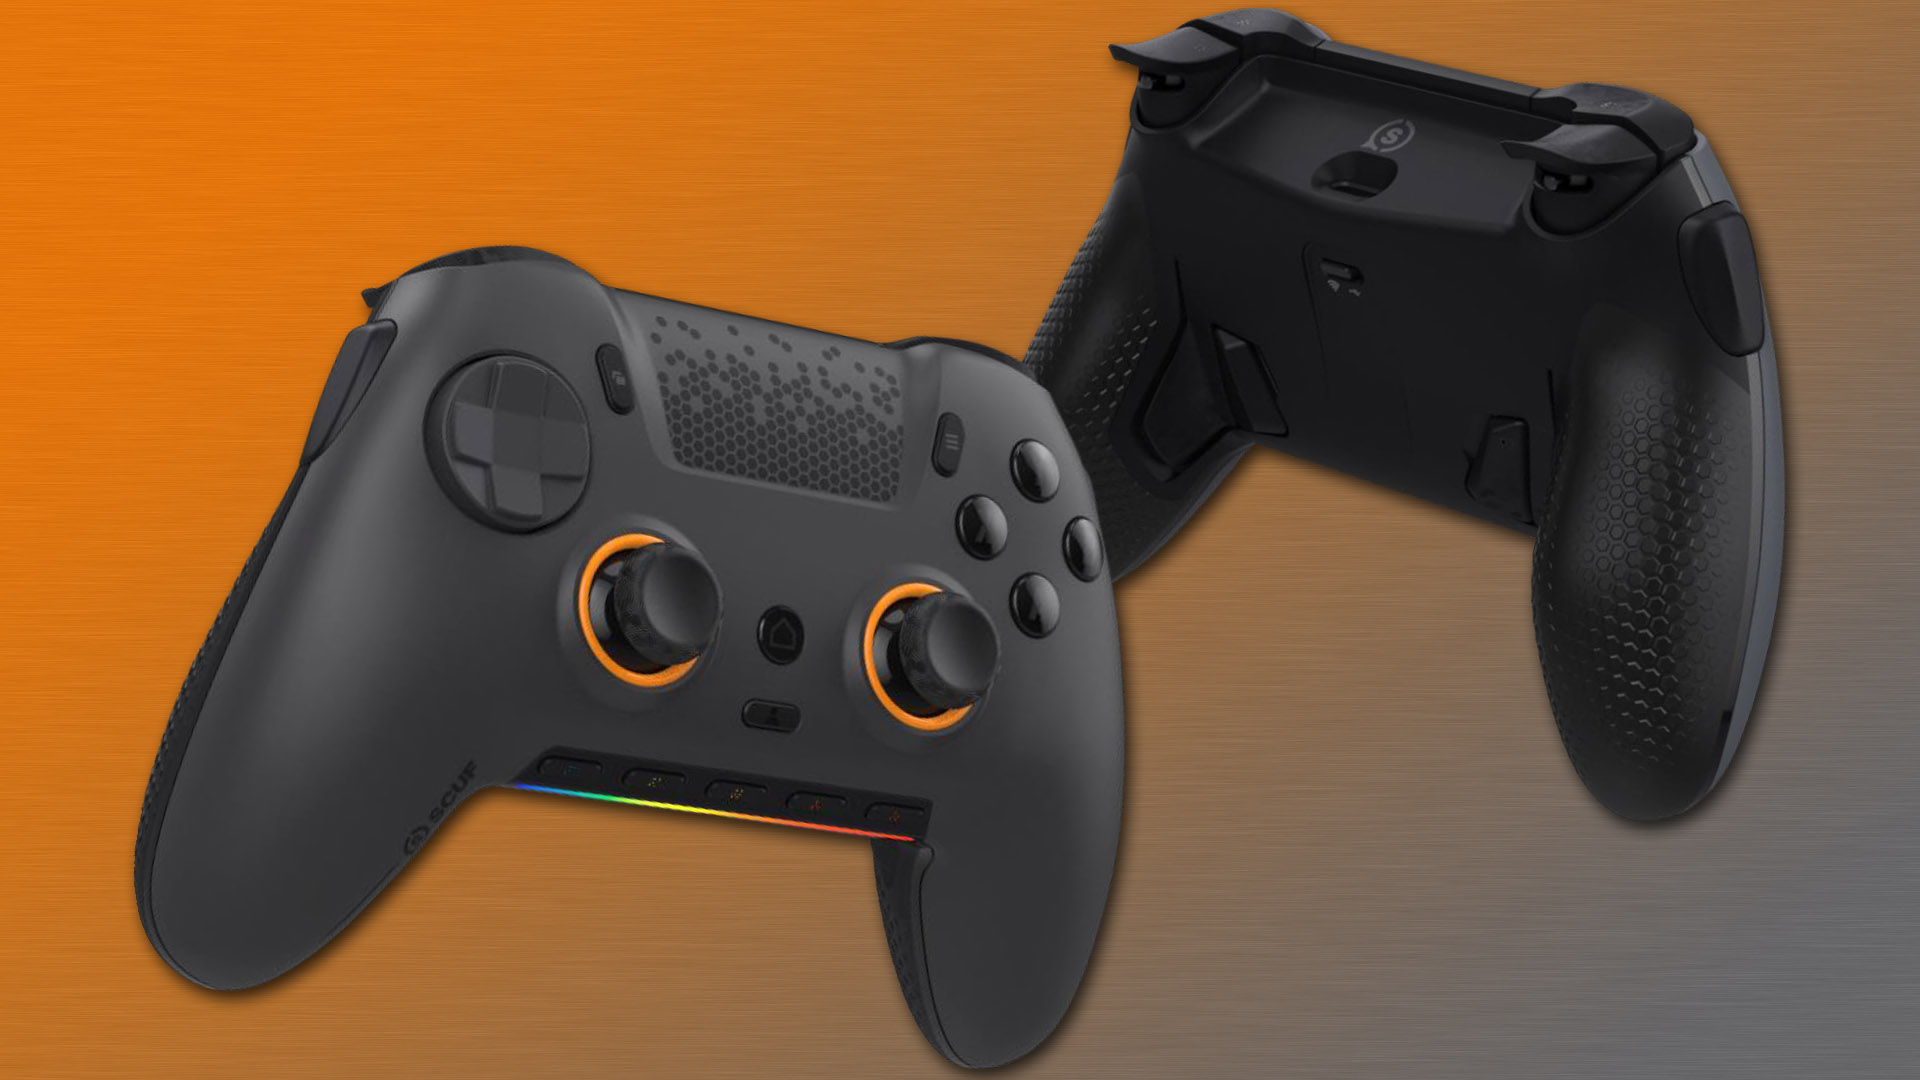 Scuf’s Envision controllers were tailor-made for PC gaming